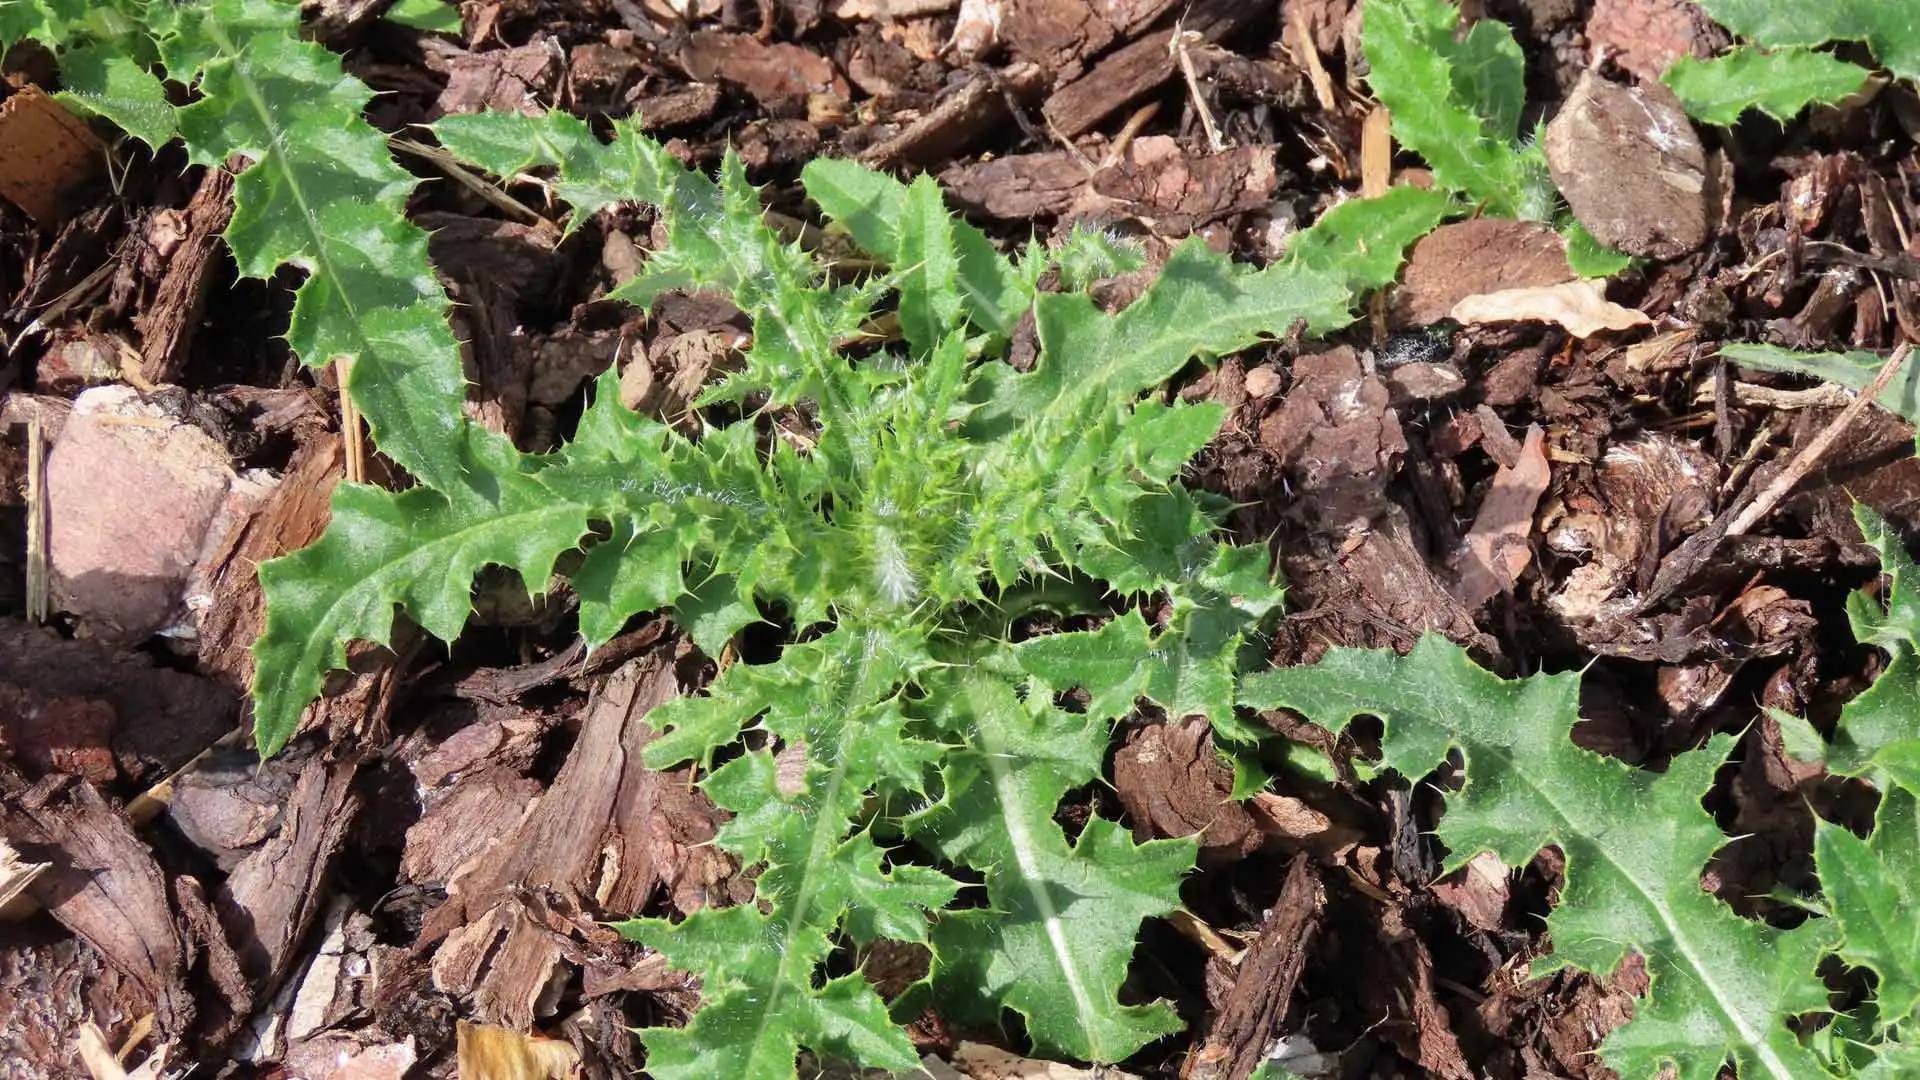 Have Weeds Invaded Your Landscape Beds? Get Rid of Them ASAP!